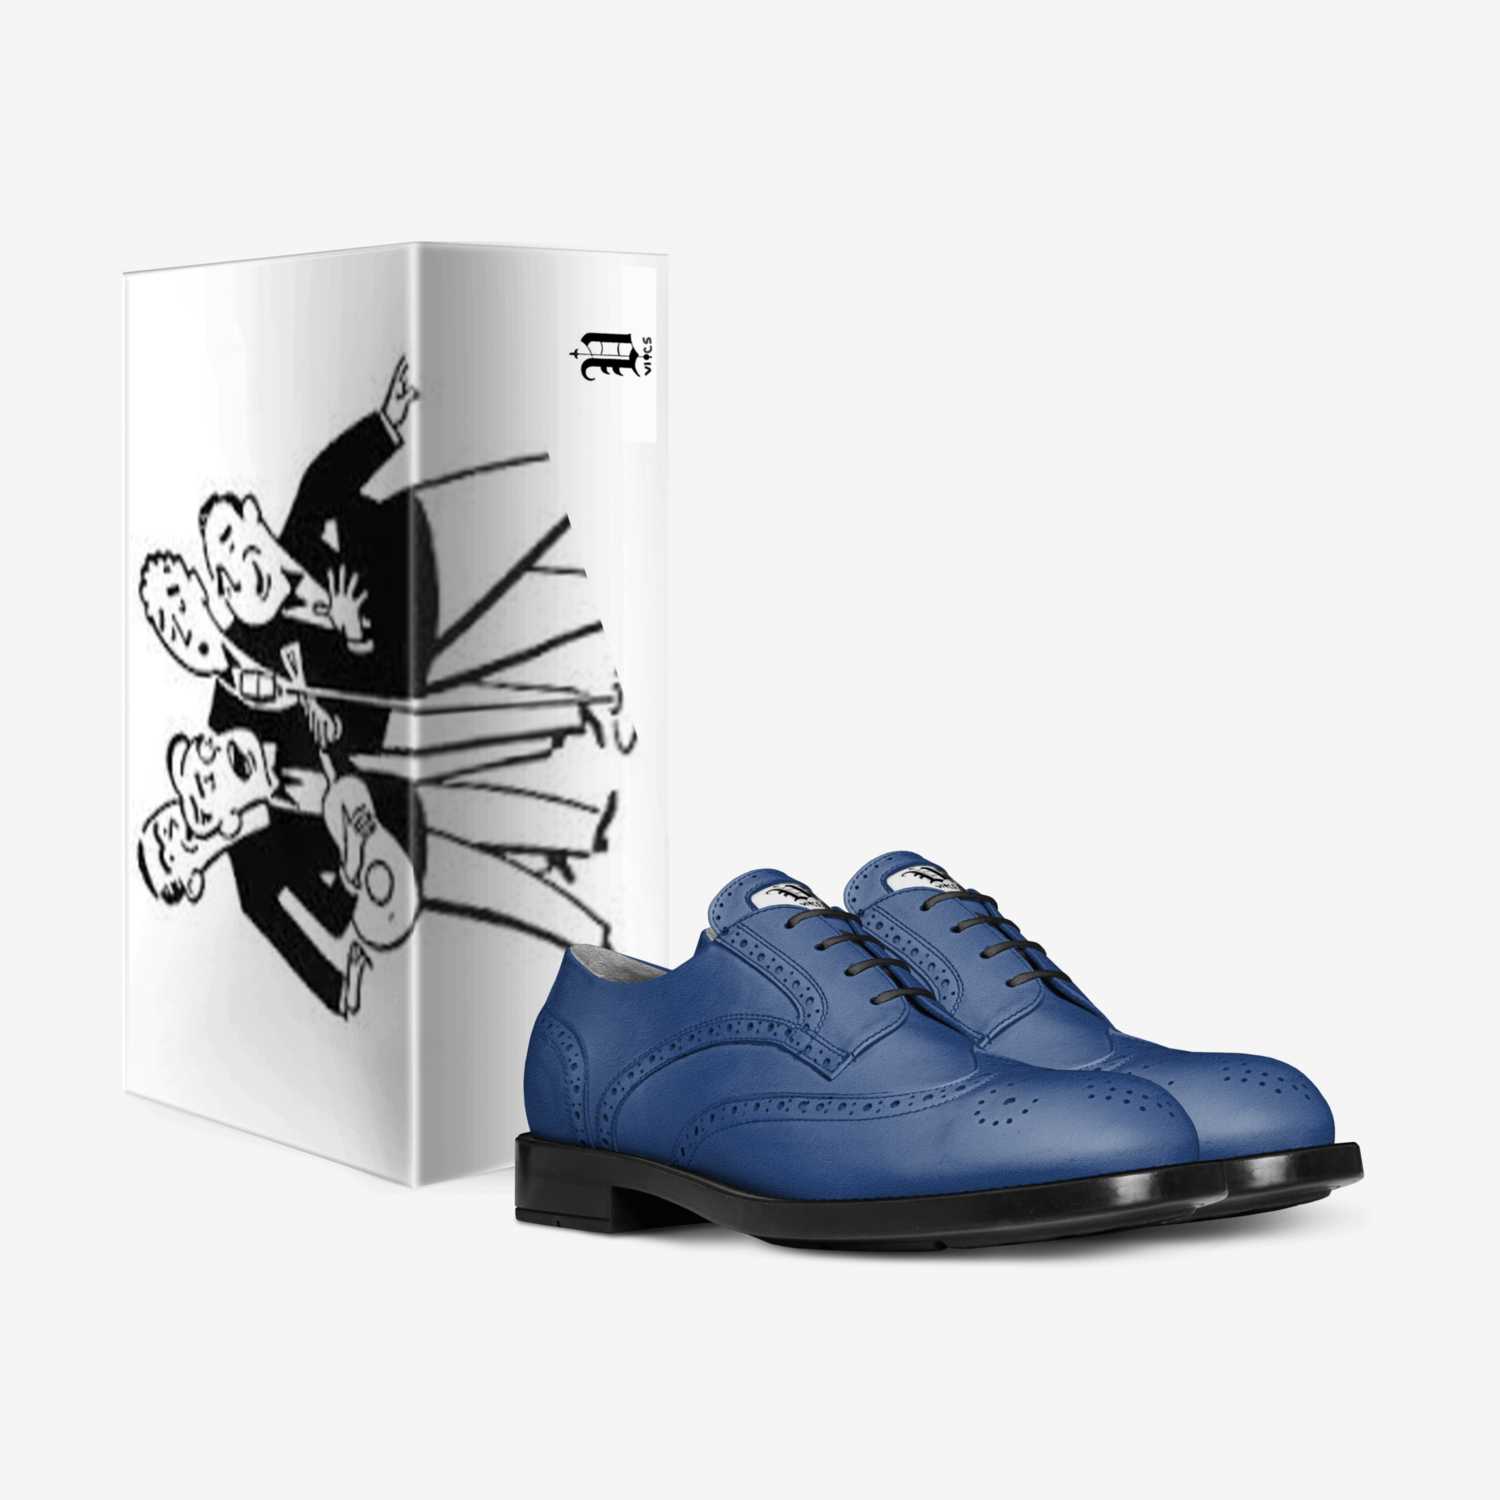 Vics blue suedes custom made in Italy shoes by Brayden Murphy | Box view